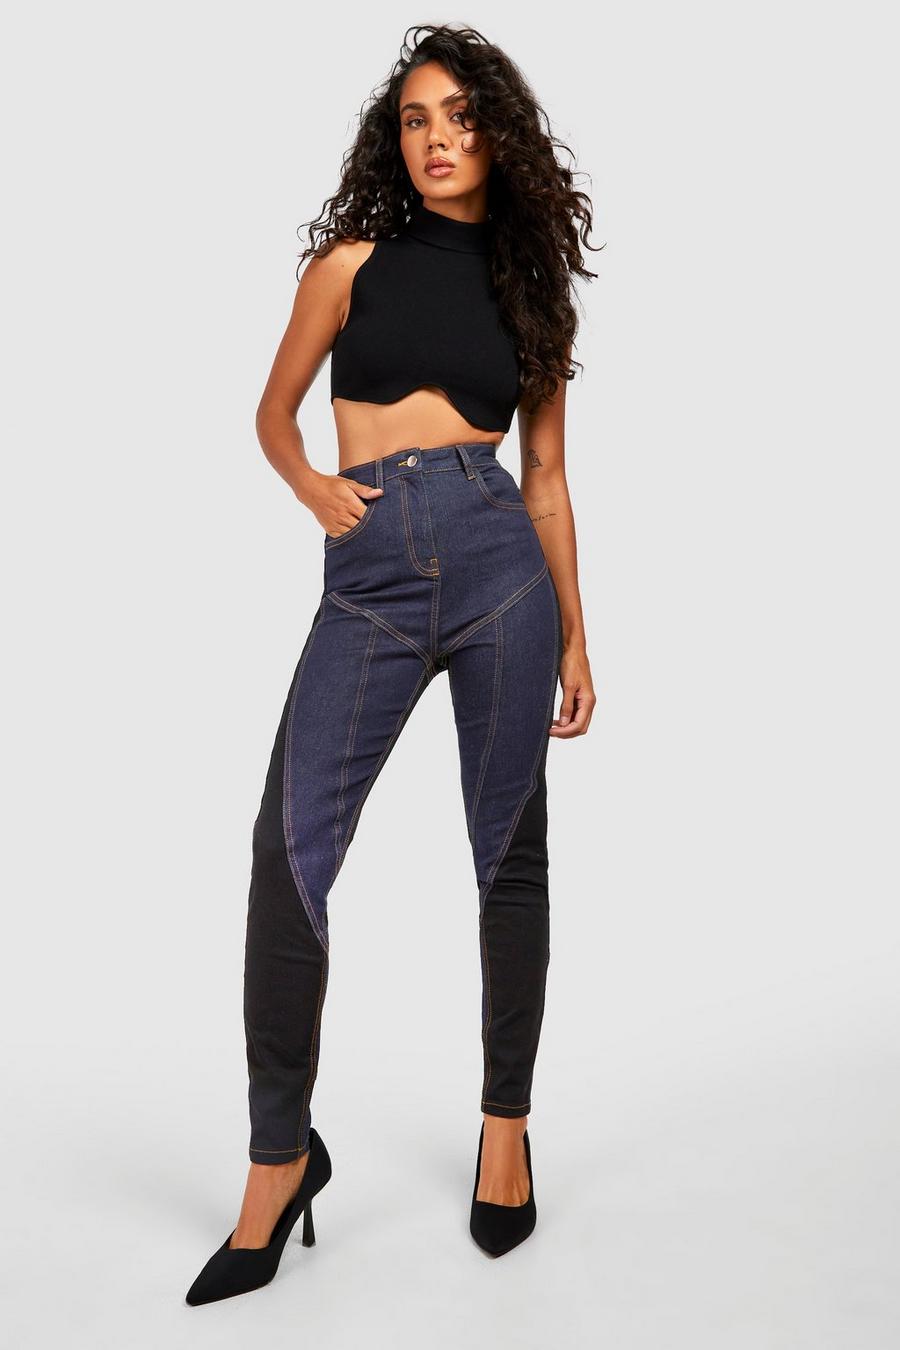 passage Refinement Faderlig High Waisted Contrast Contour Skinny Jeans | boohoo